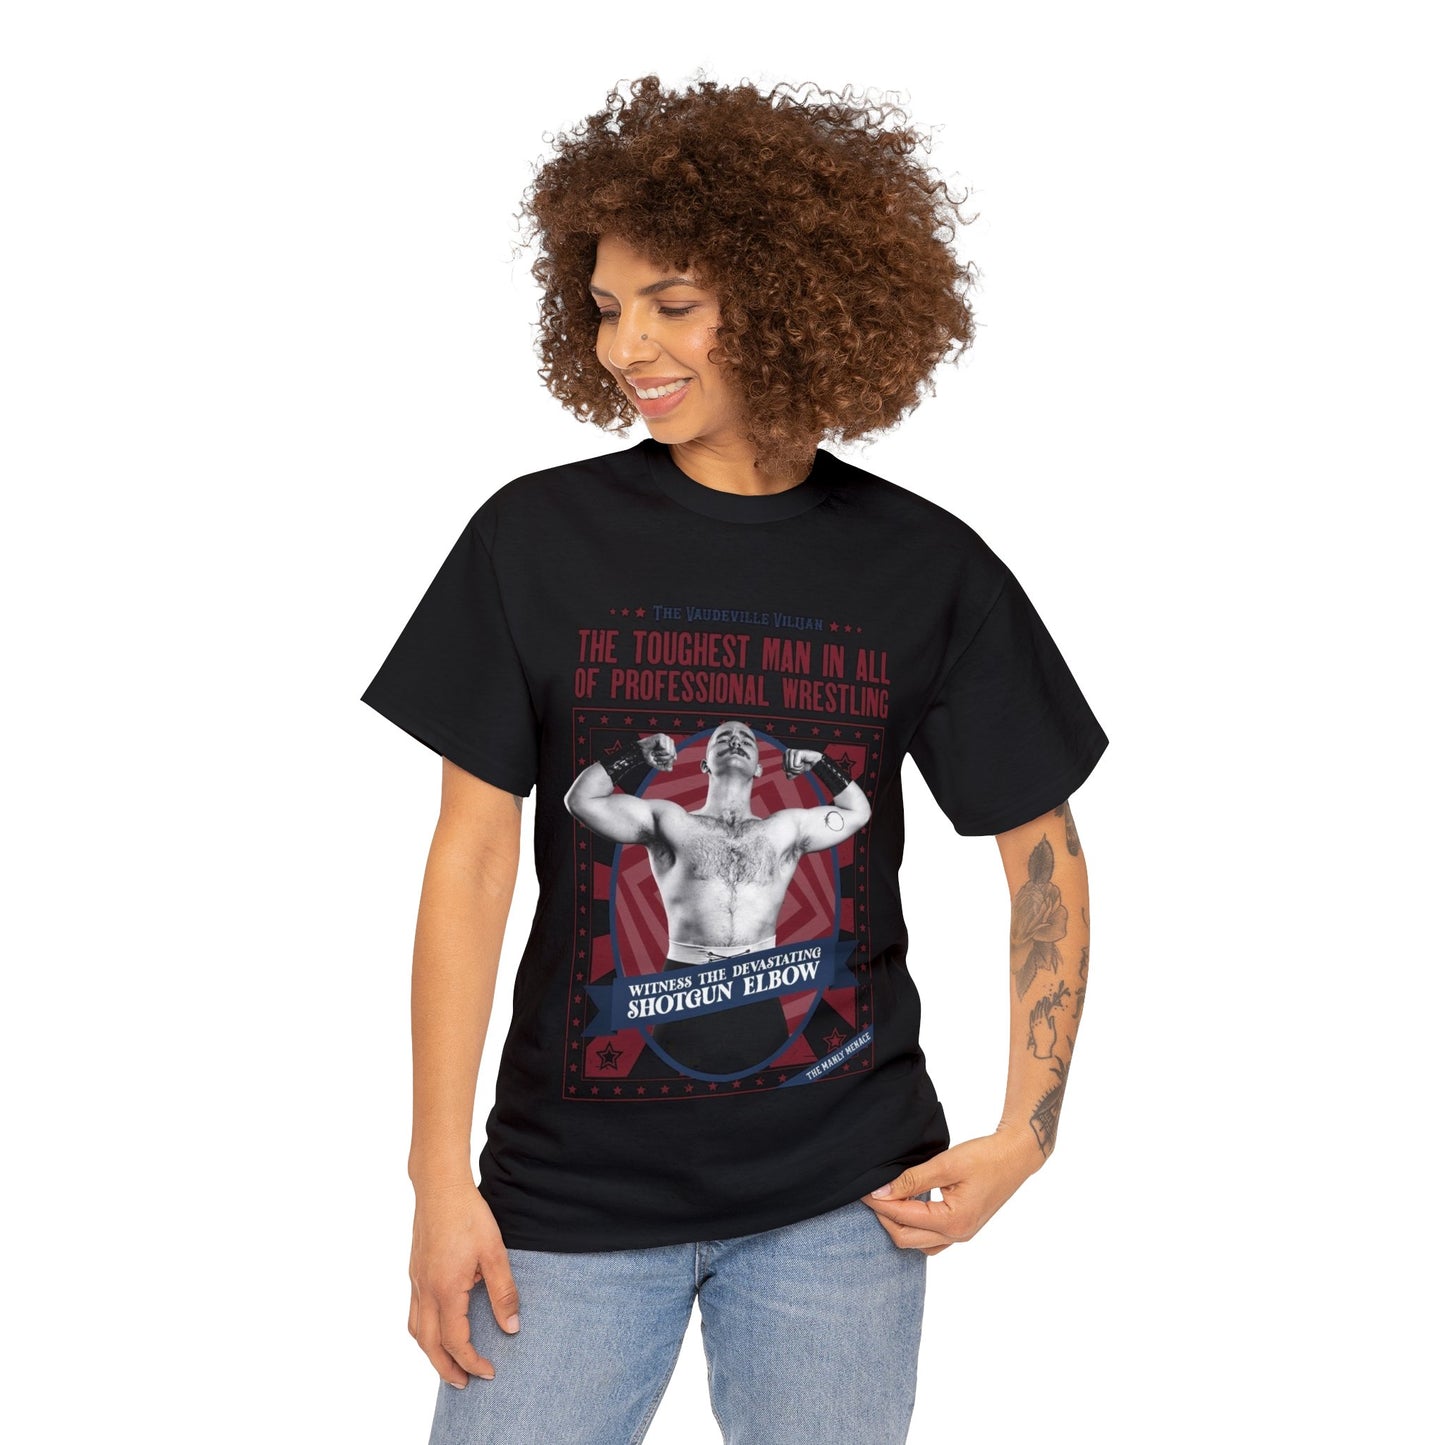 Tommy Winslow - Toughest Man in Wrestling - Printed Tee